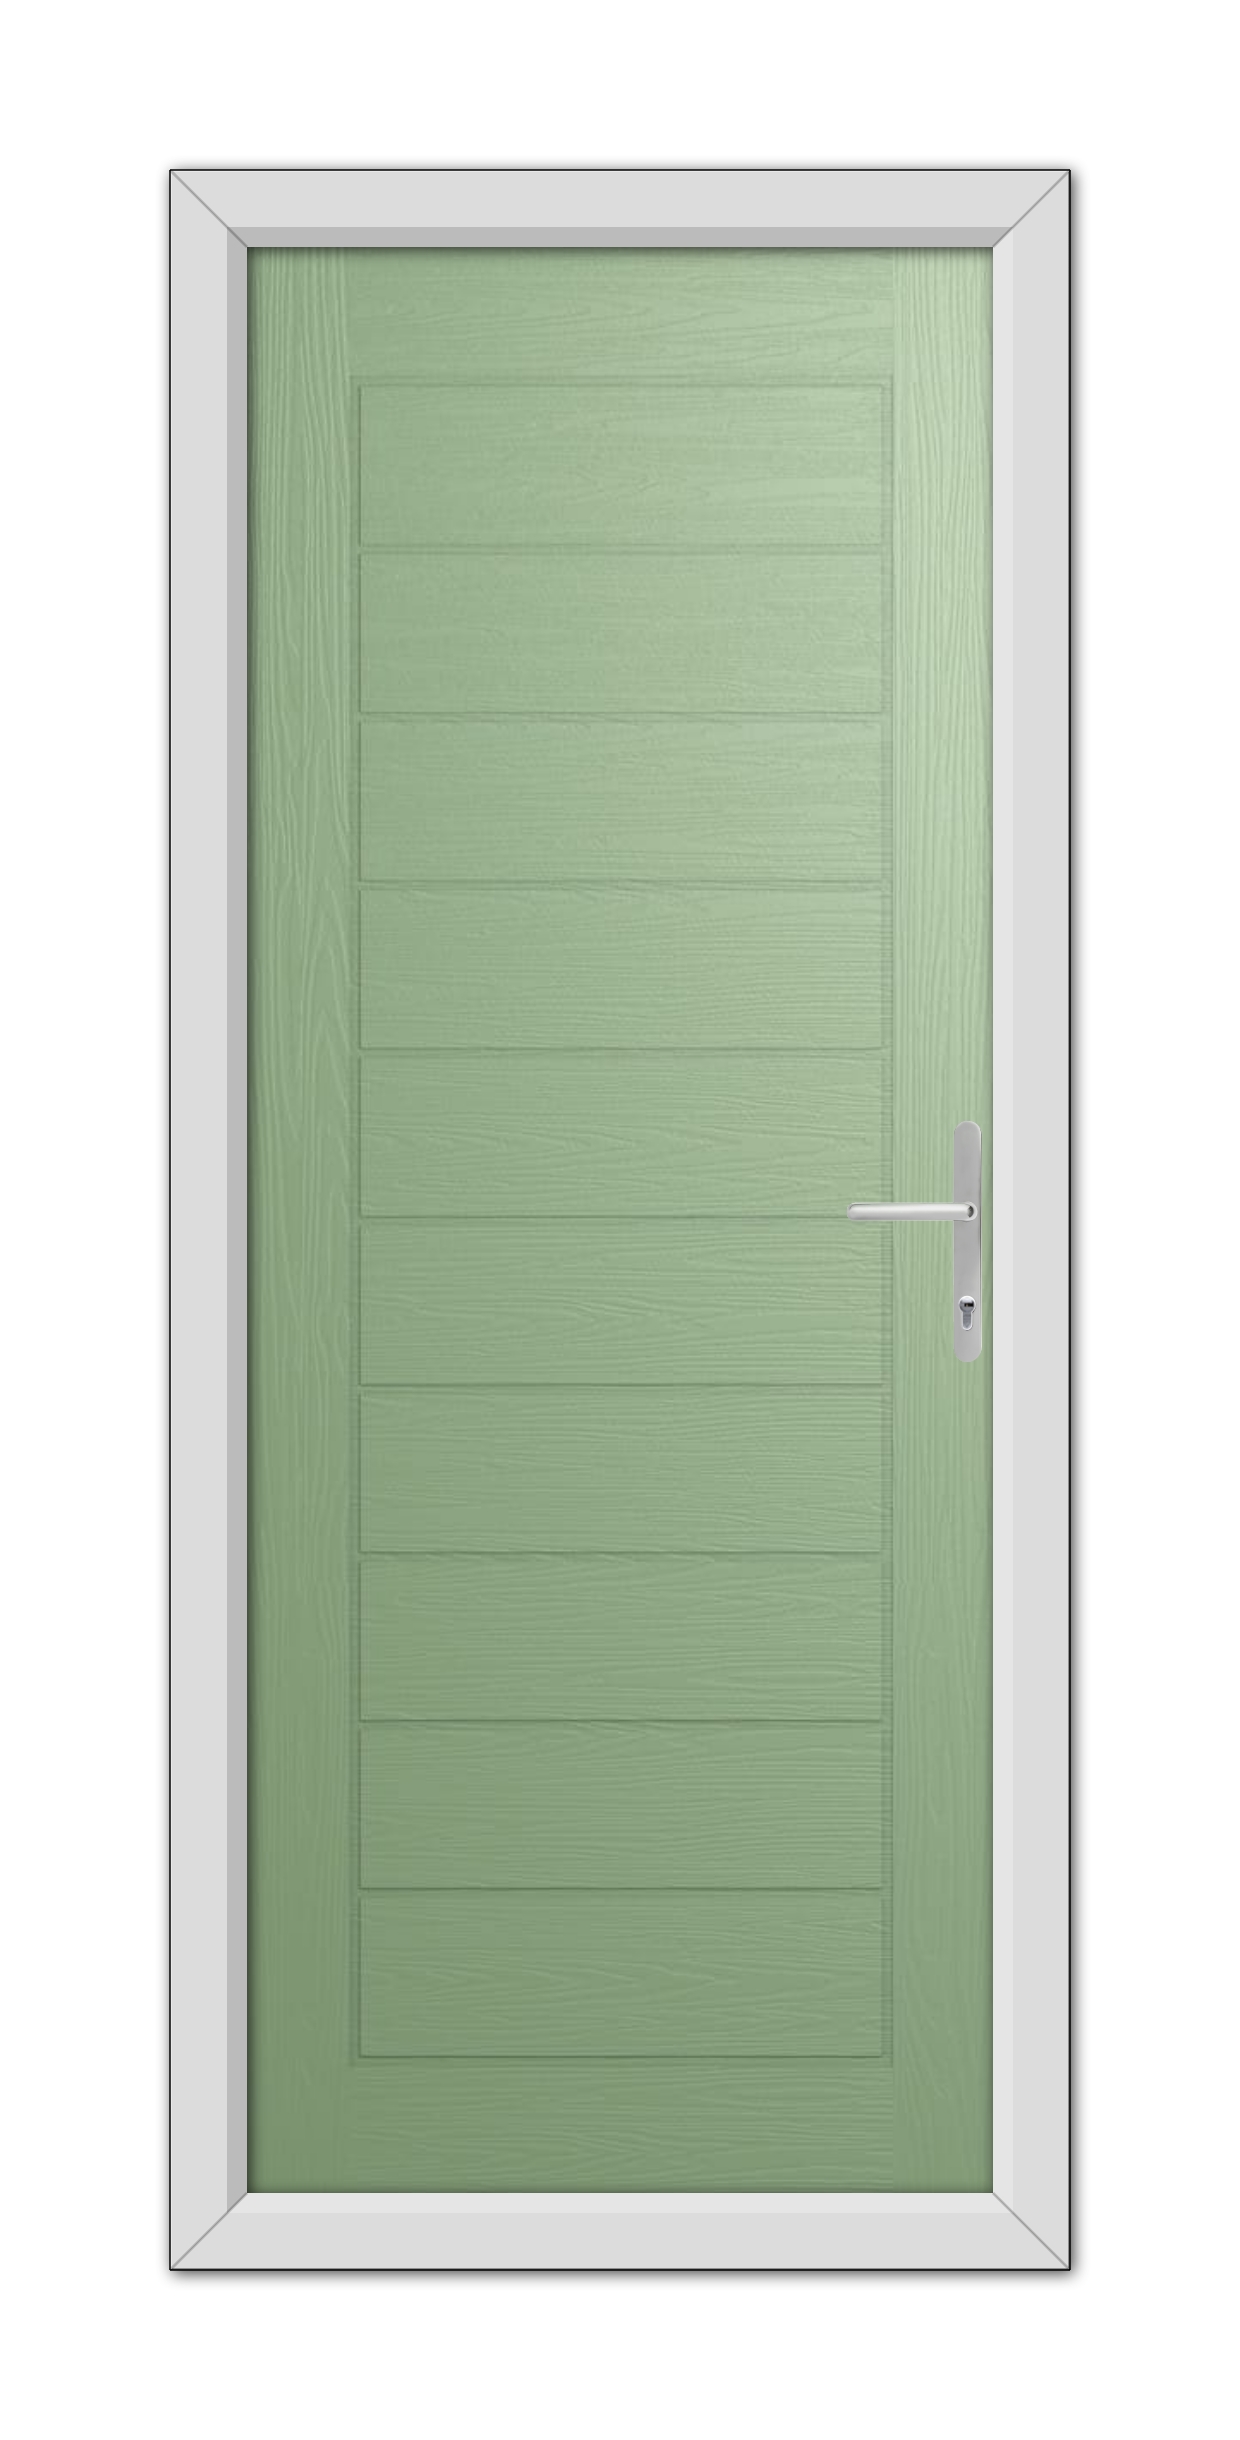 A Chartwell Green Cambridge Composite Door 48mm Timber Core with a horizontal panel design and a silver handle, set within a white door frame, isolated on a white background.